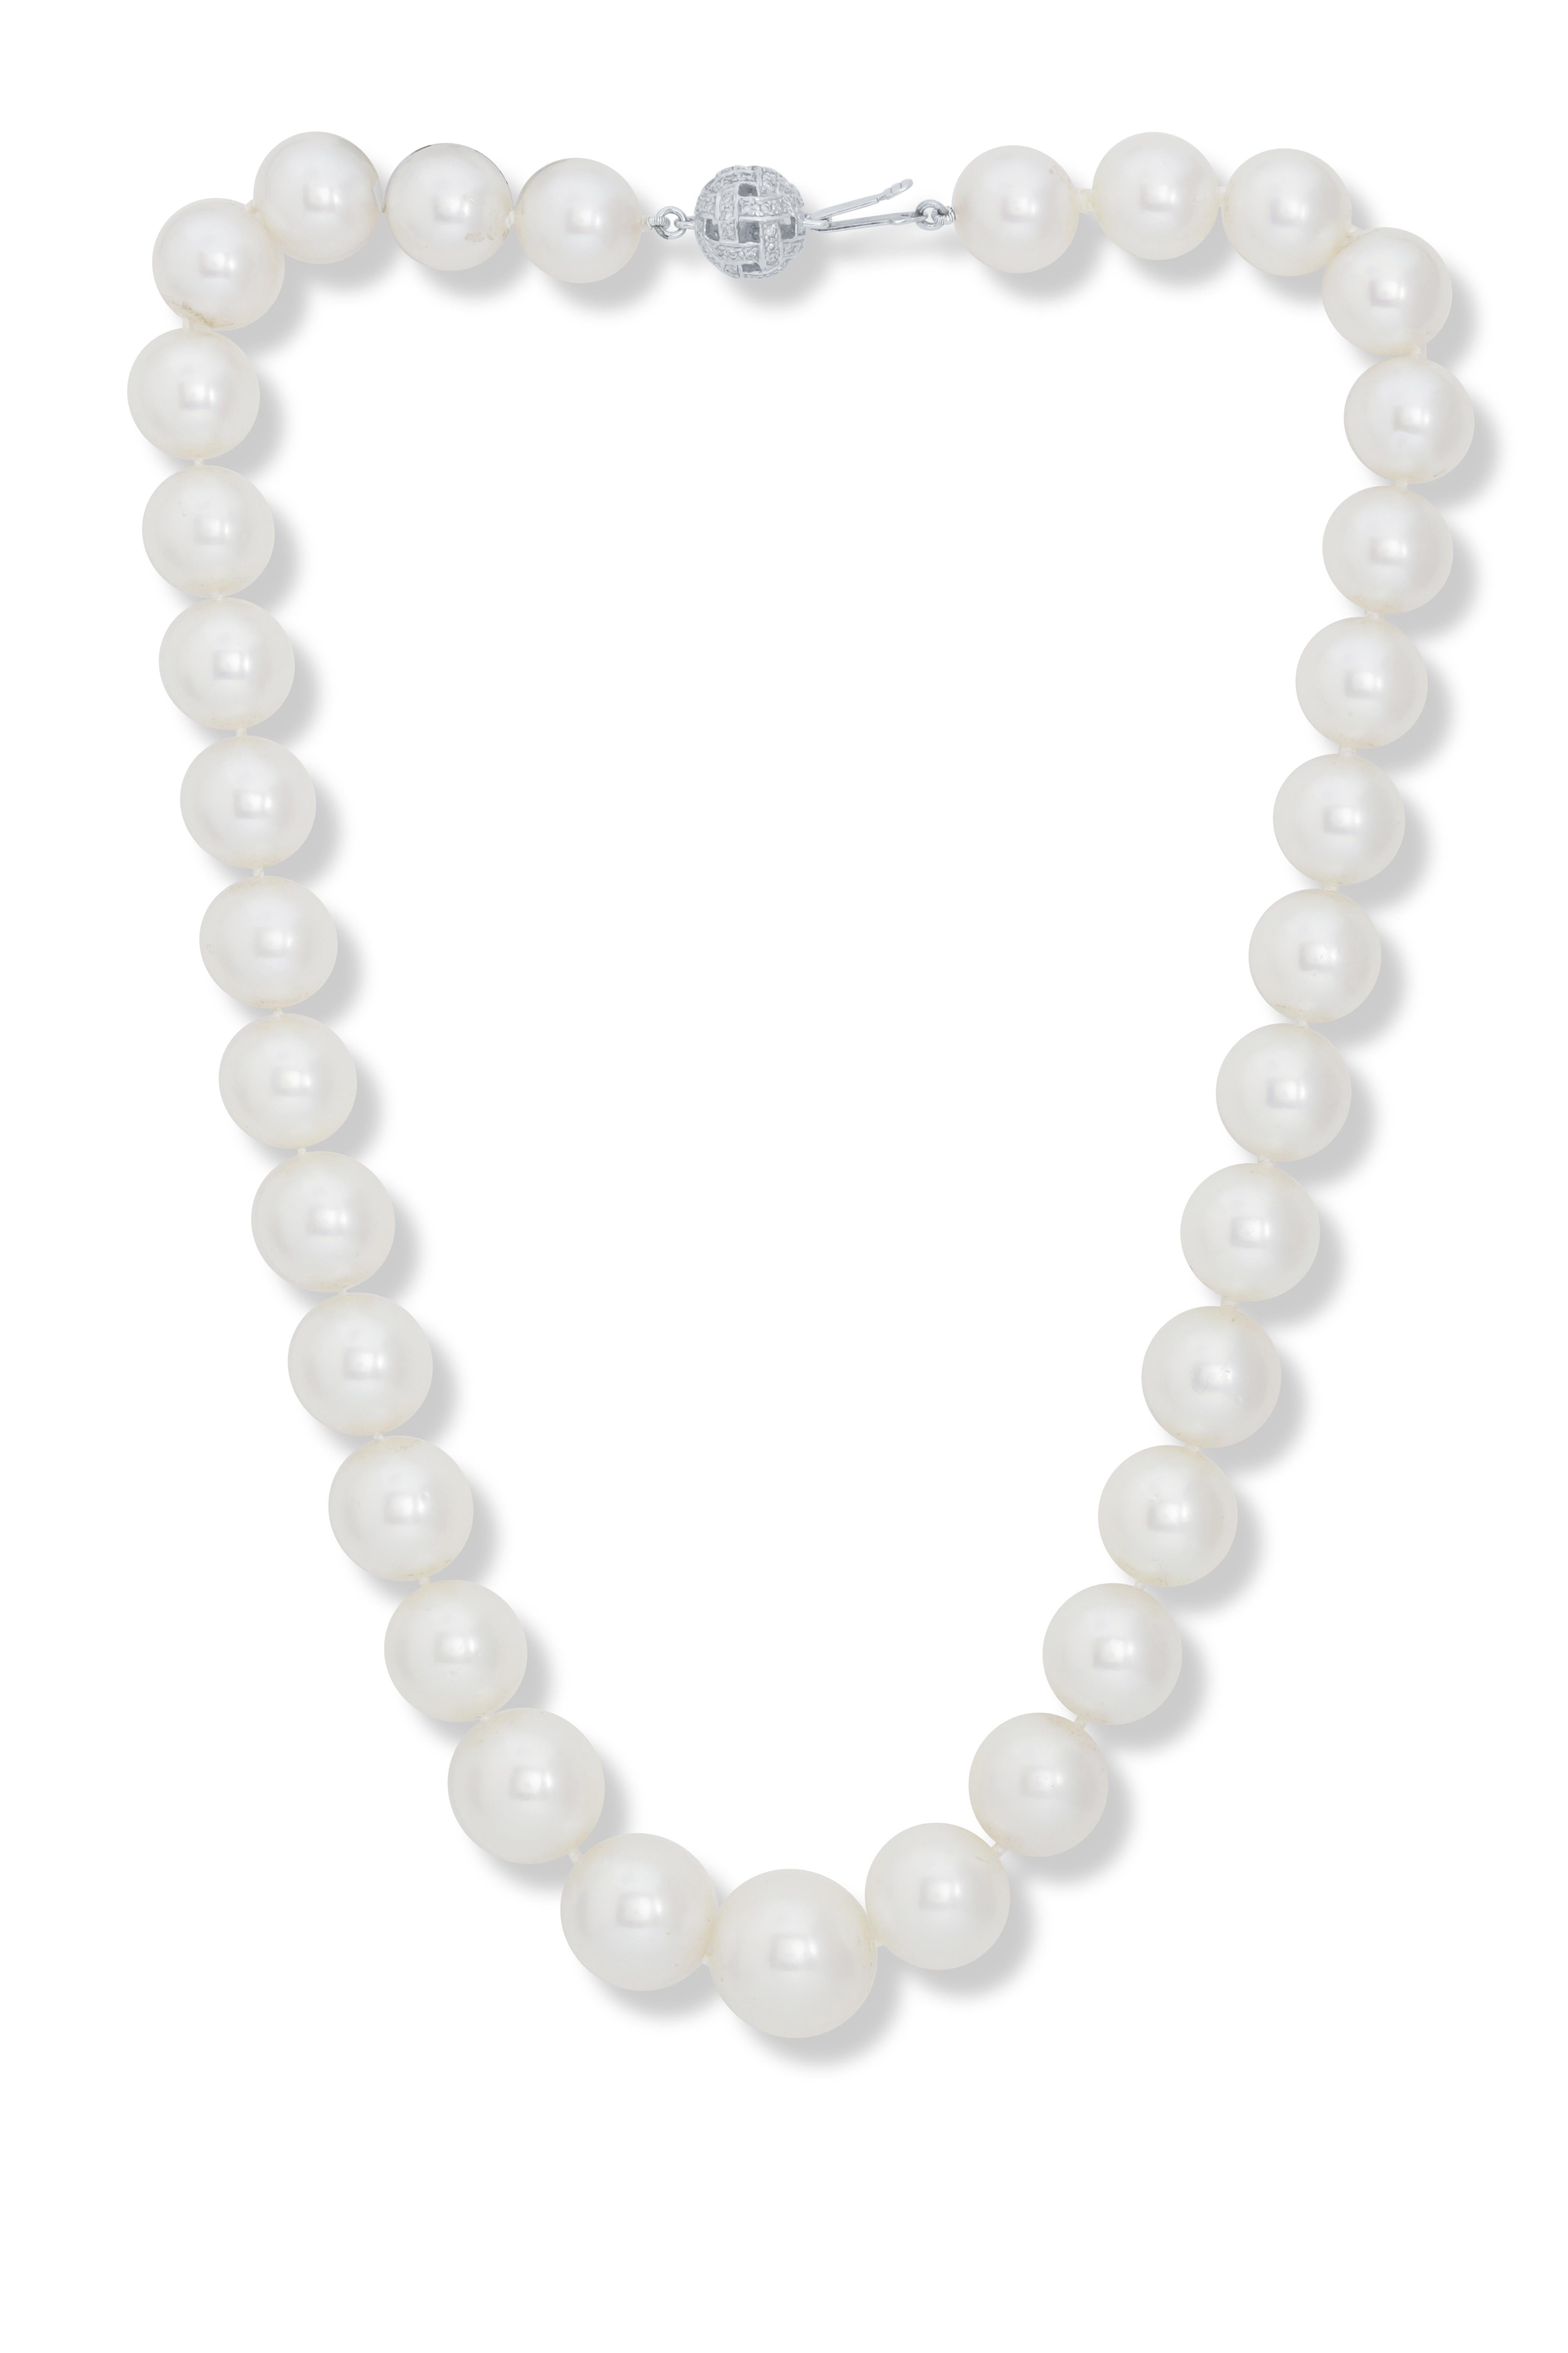 Modern Diana M. 18 kt white gold pearl necklace adorned with 11-15 mm tahitian south se For Sale